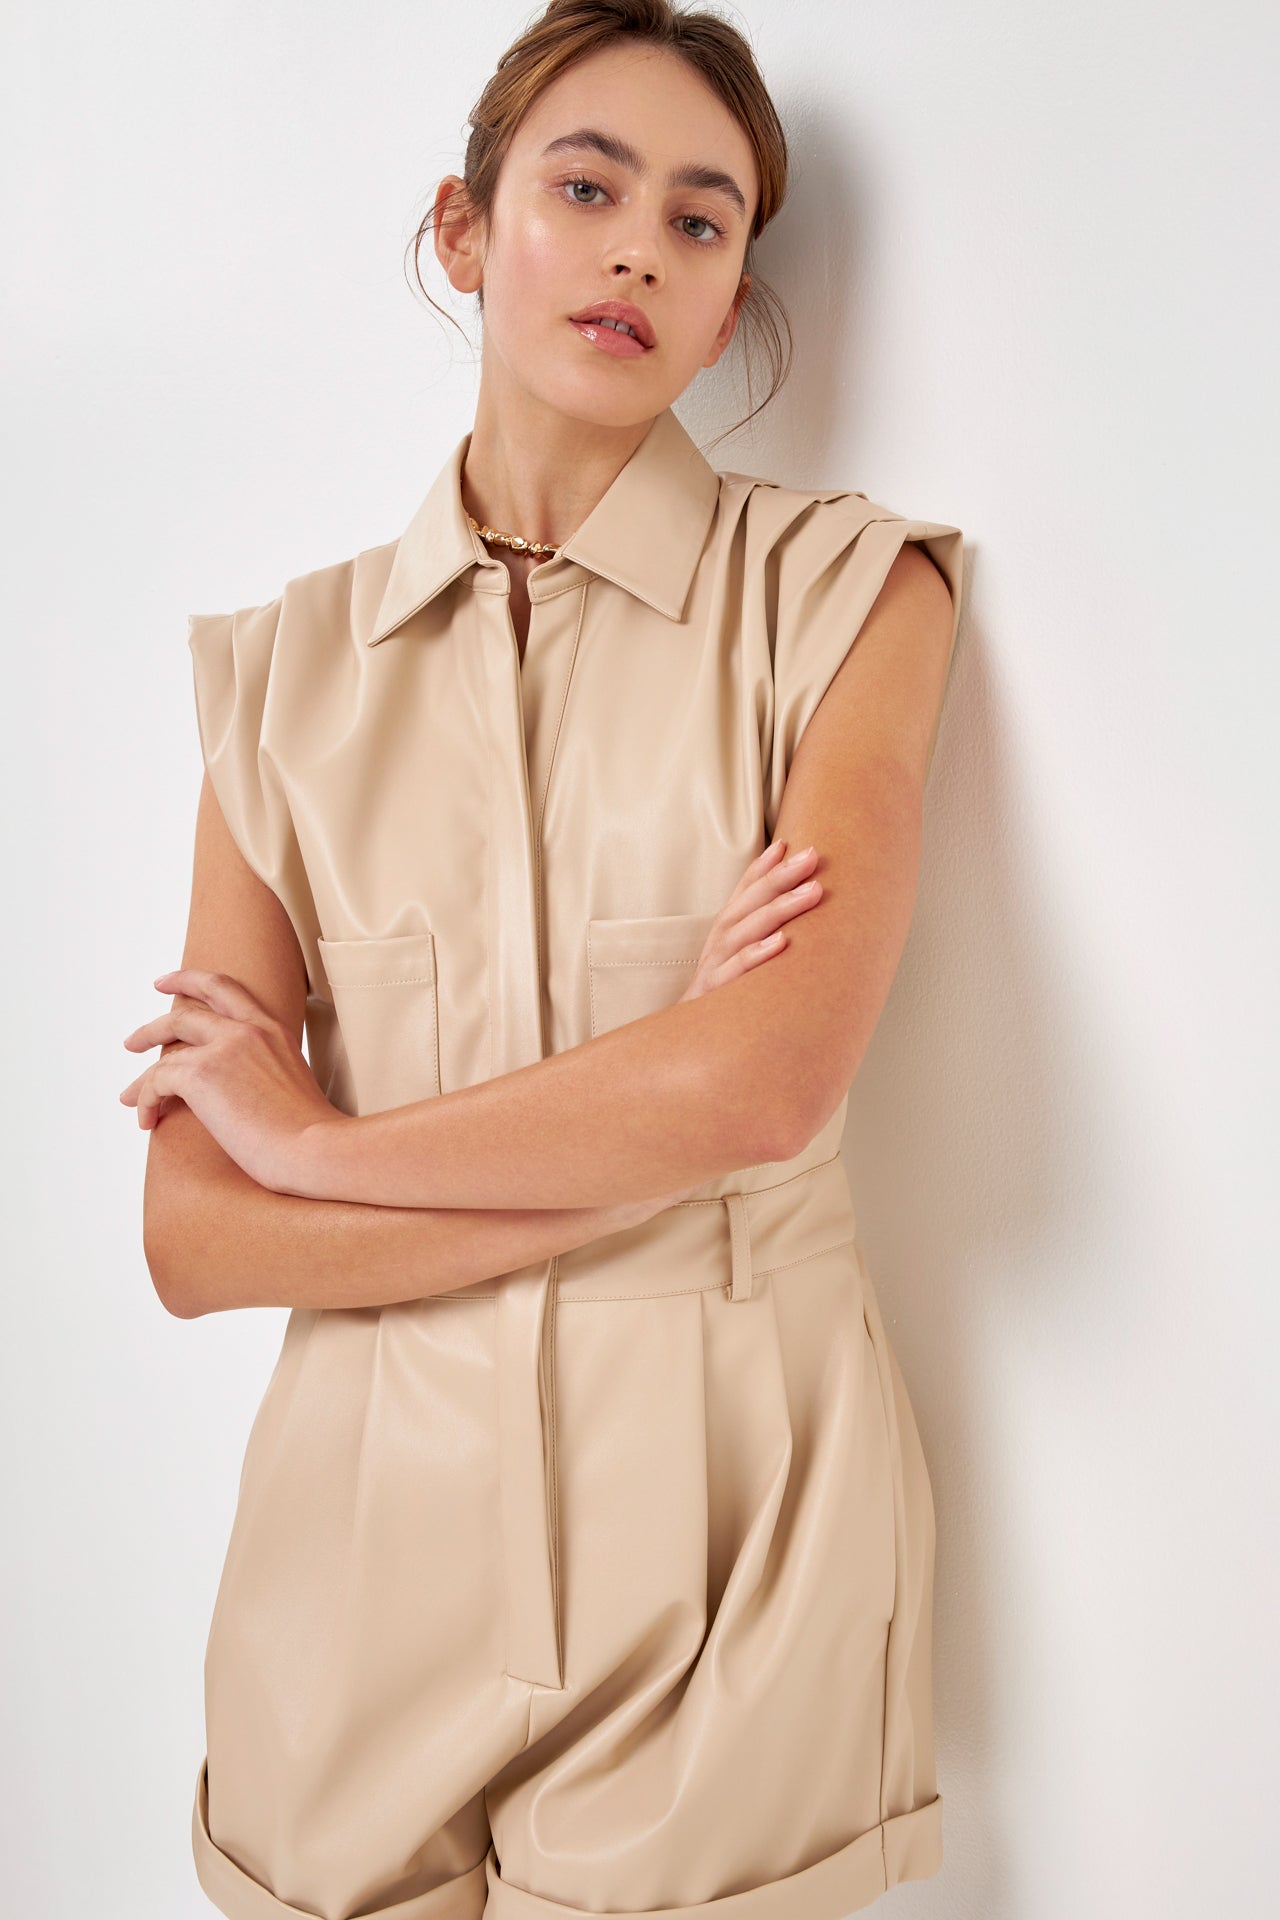 GREY LAB - Leather Romper - ROMPERS available at Objectrare